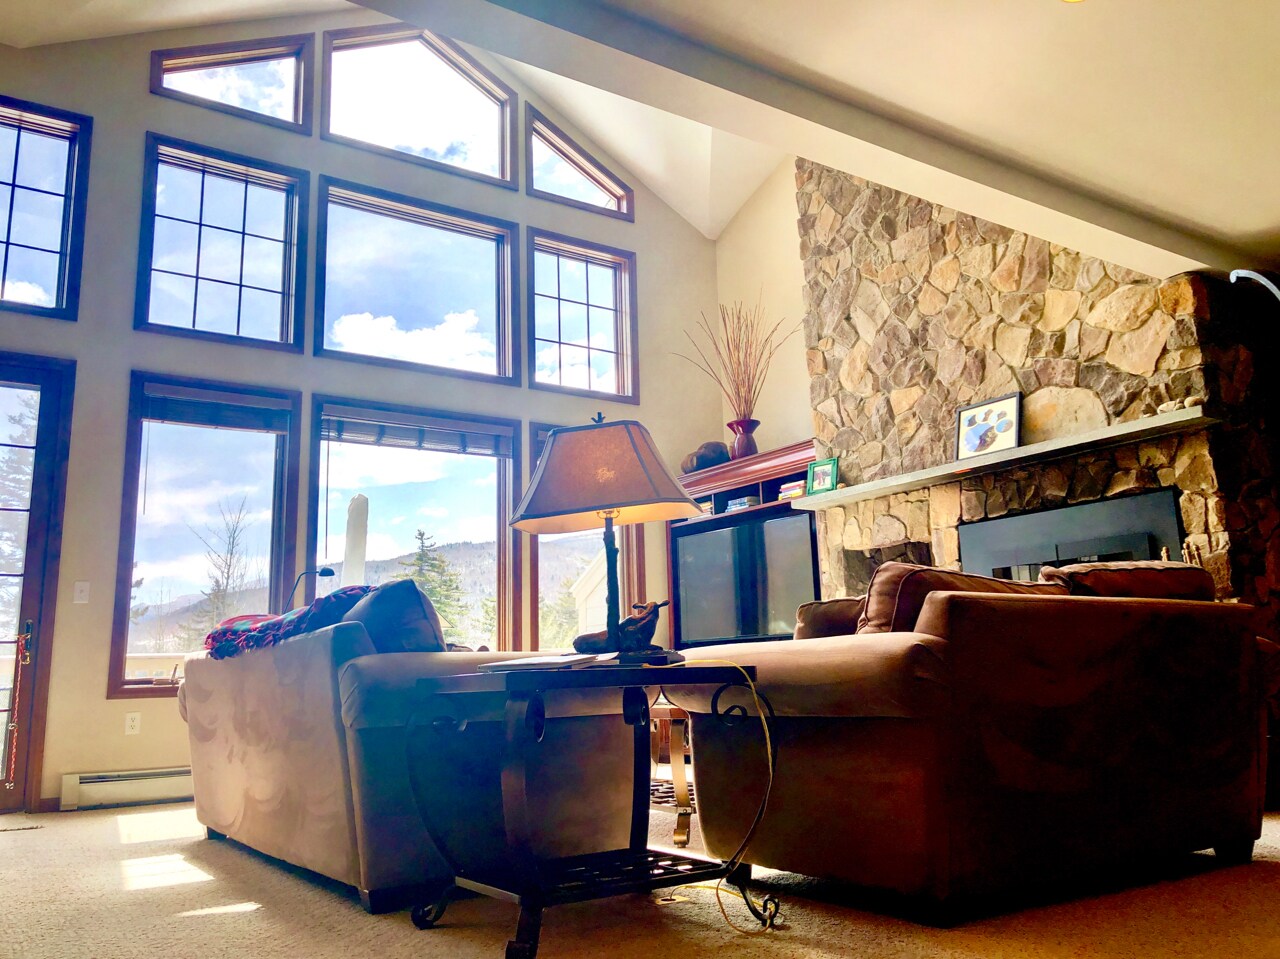 SH8 boasts of its sophisticated mountain decor and gorgeous views of the Bretton Woods Ski Slopes all the way into Crawford Notch!